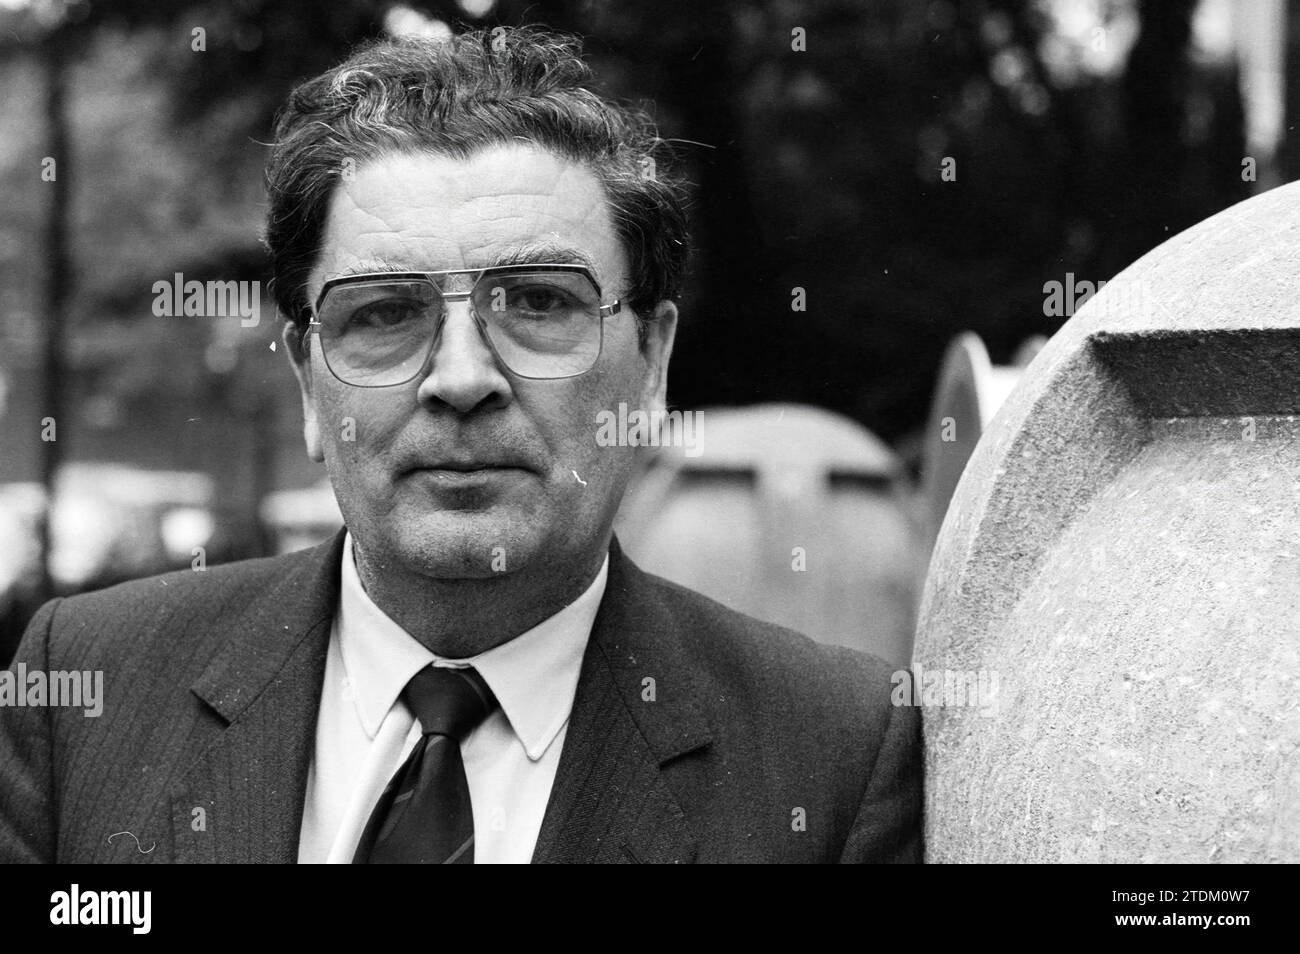 John Hume, Trade Union Museum, Amsterdam, Amsterdam, The Netherlands, 25-05-1994, Whizgle News from the Past, Tailored for the Future. Explore historical narratives, Dutch The Netherlands agency image with a modern perspective, bridging the gap between yesterday's events and tomorrow's insights. A timeless journey shaping the stories that shape our future Stock Photo